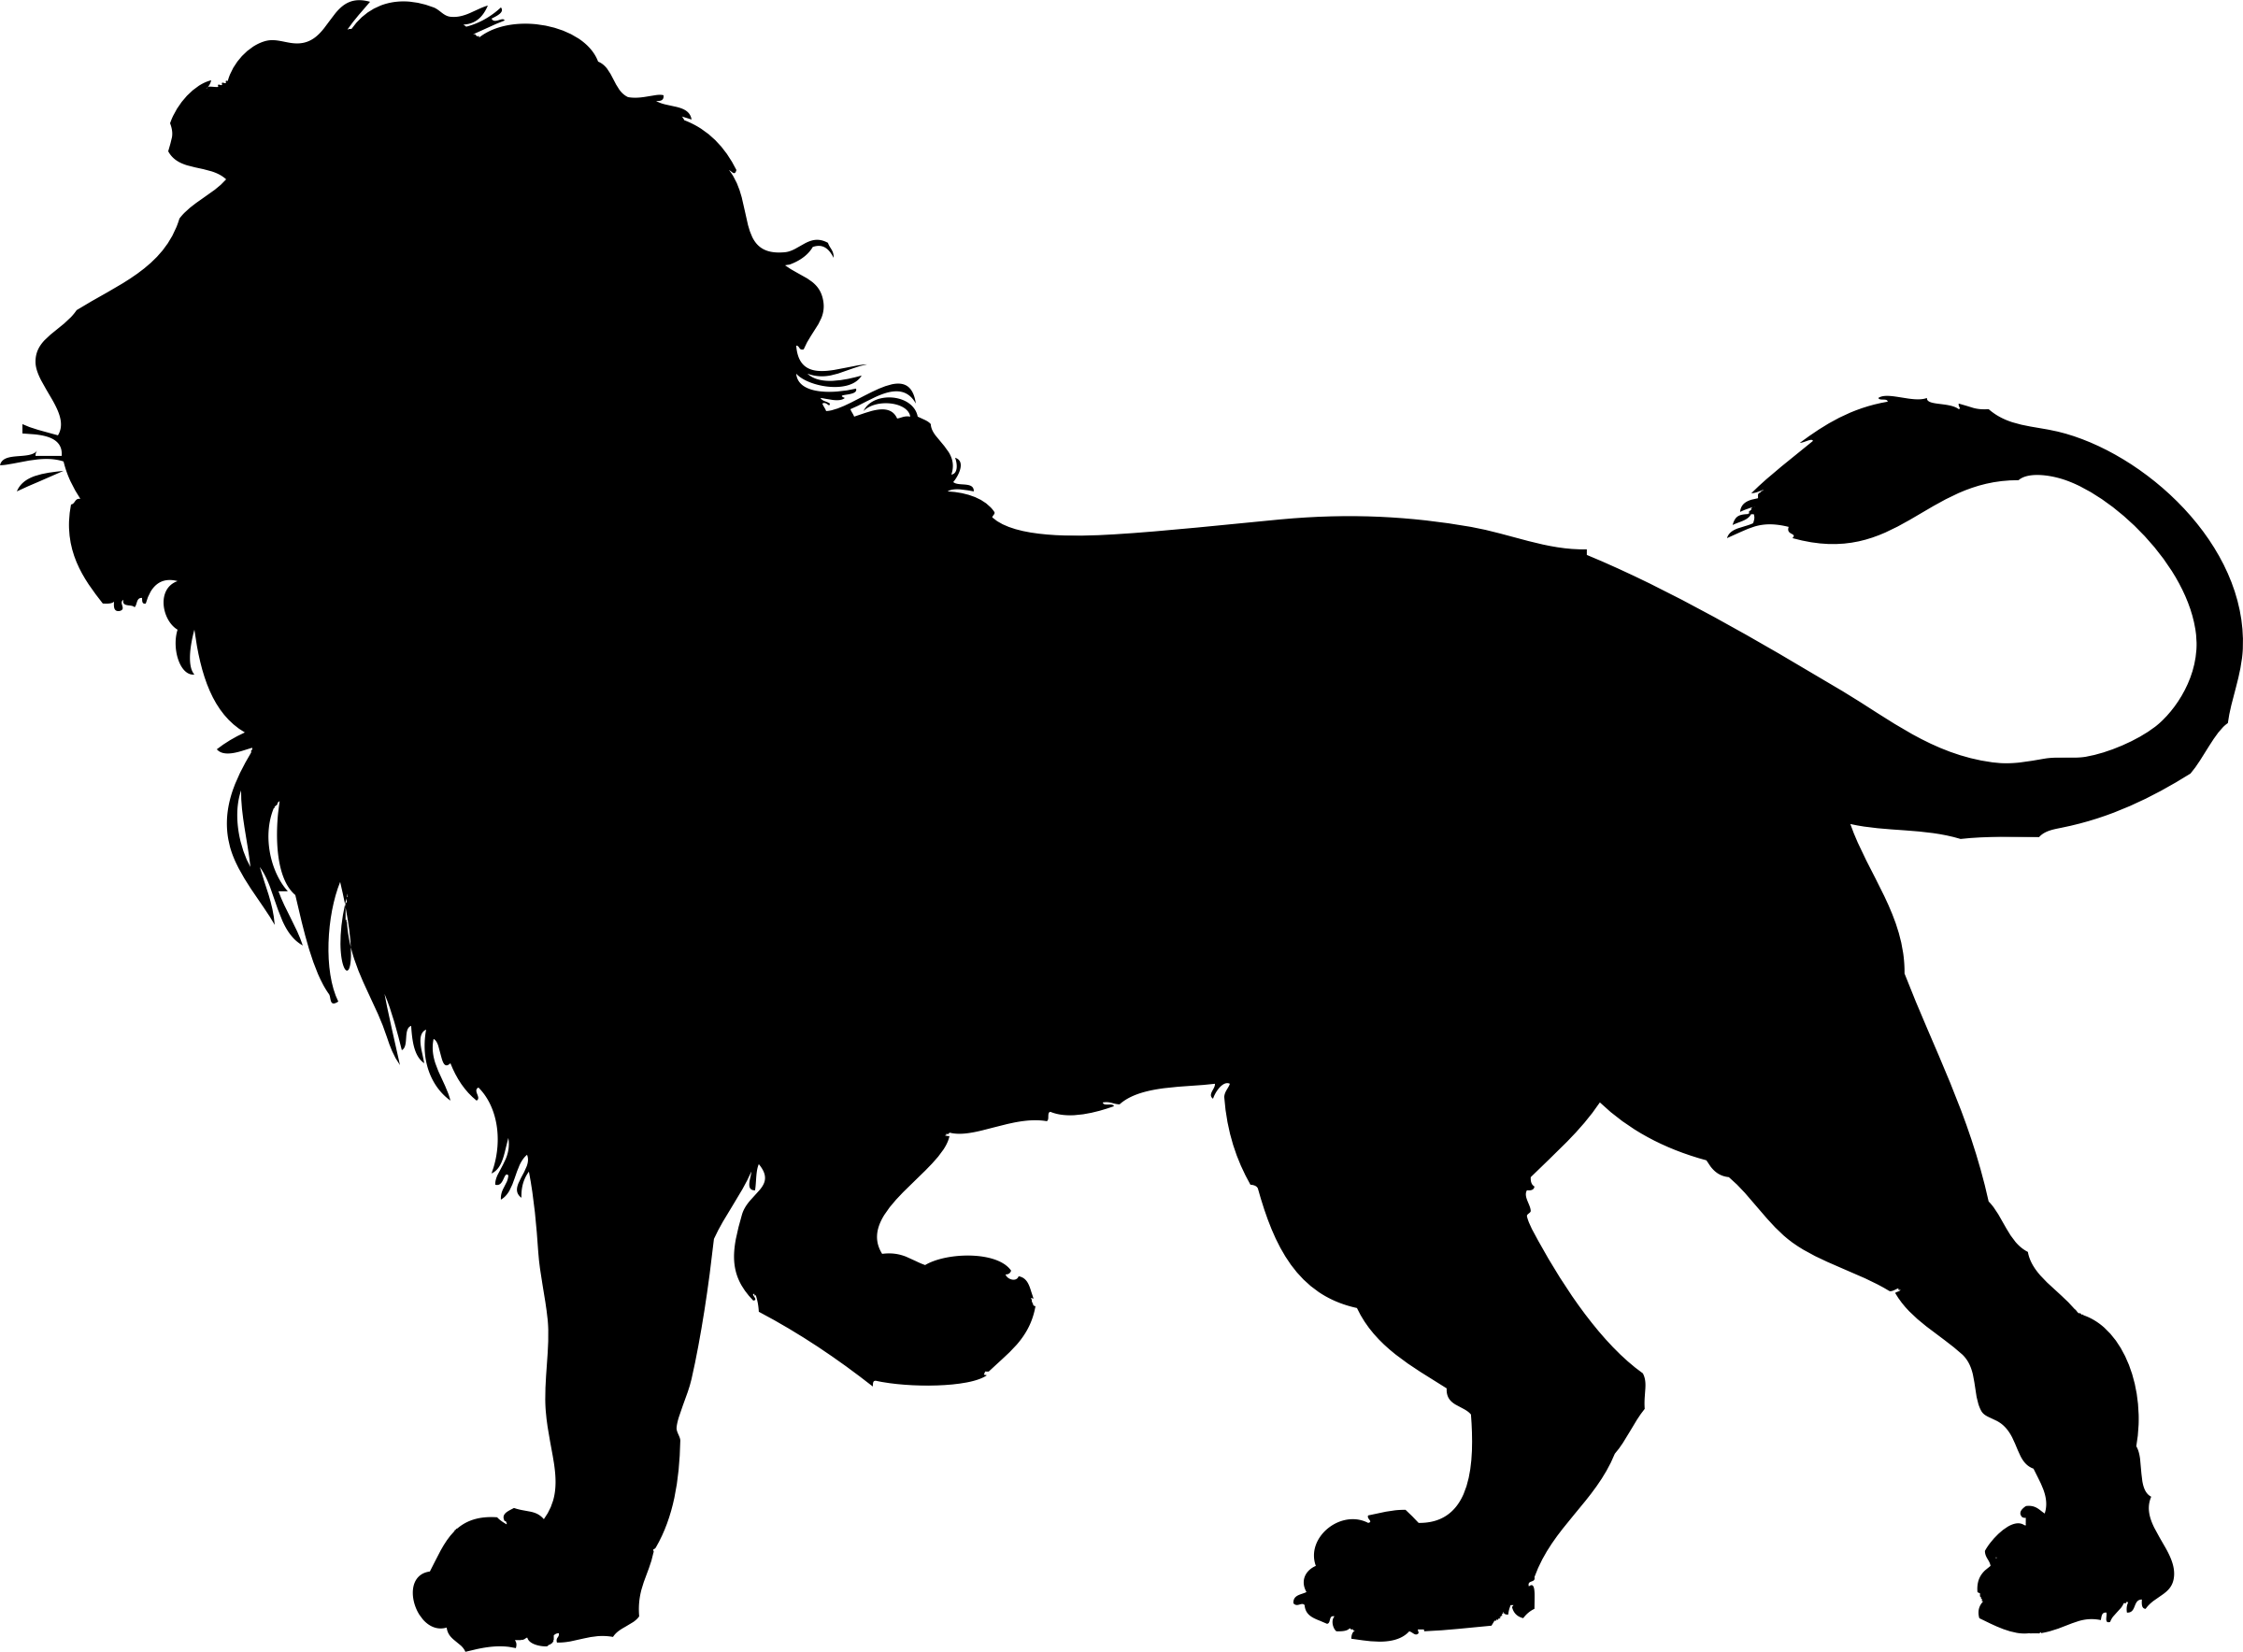 lion clipart eating